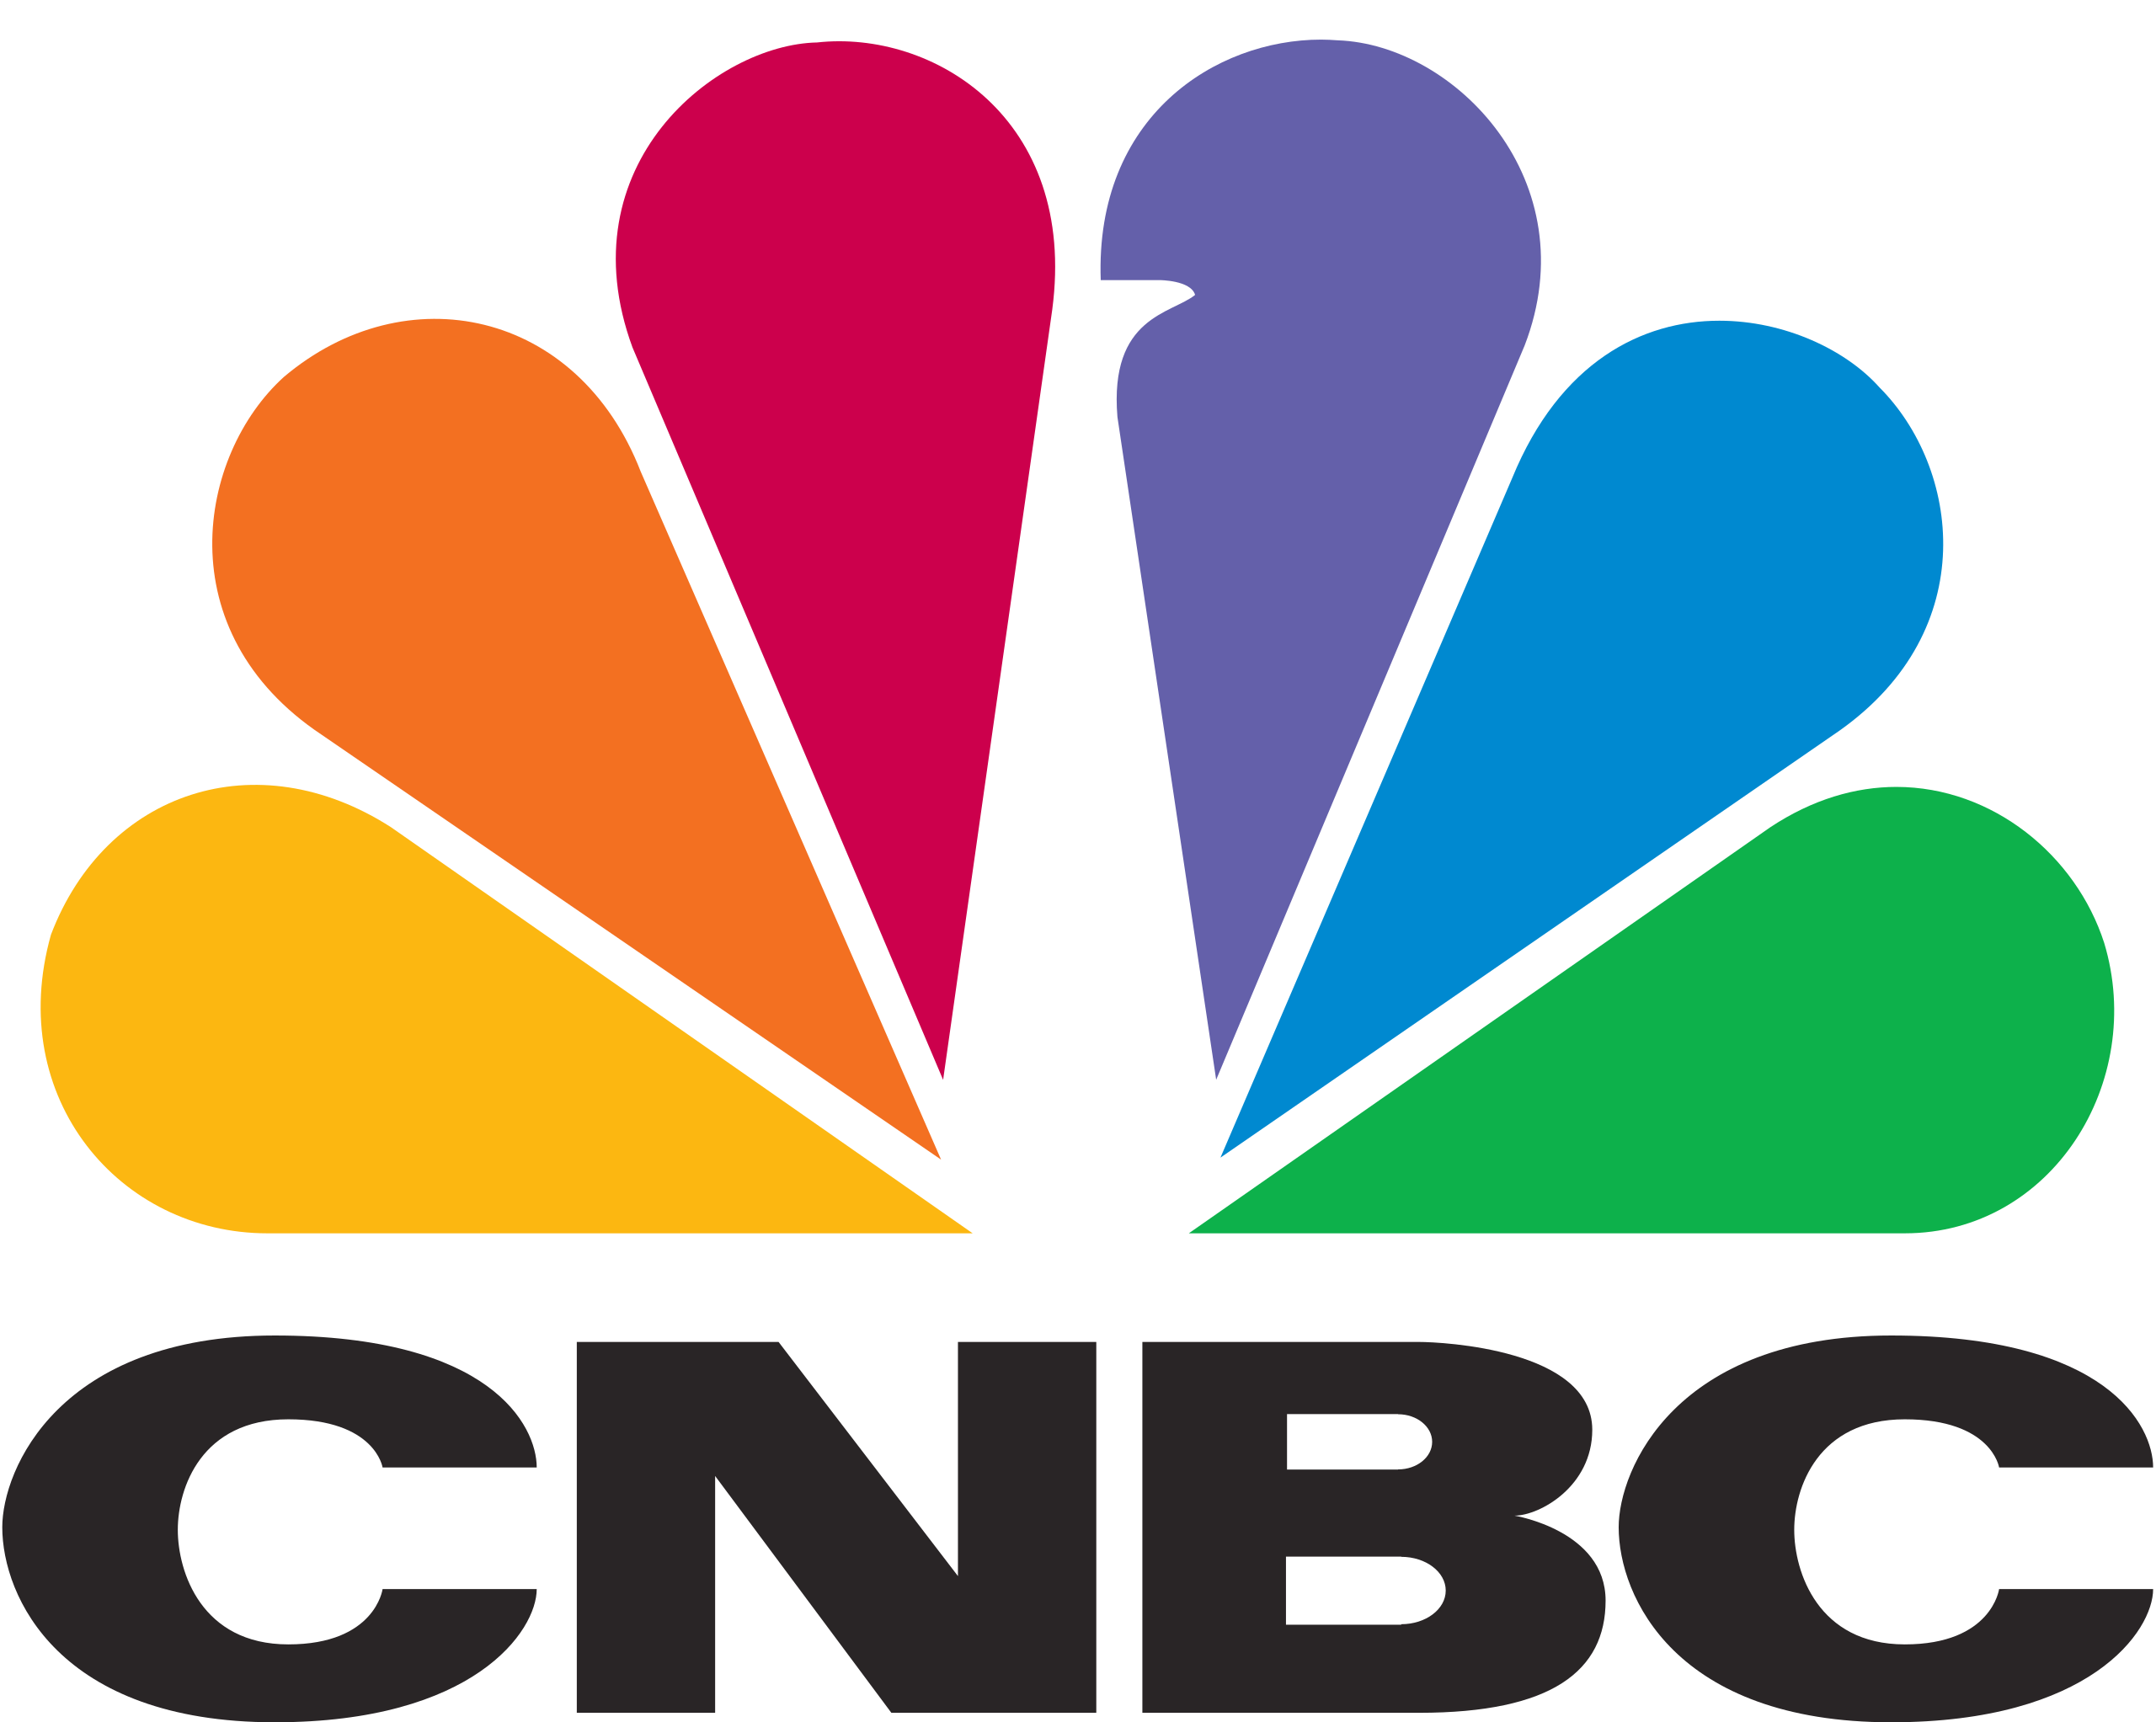 CNBC peacock logo with rainbow feathers and CNBC type below